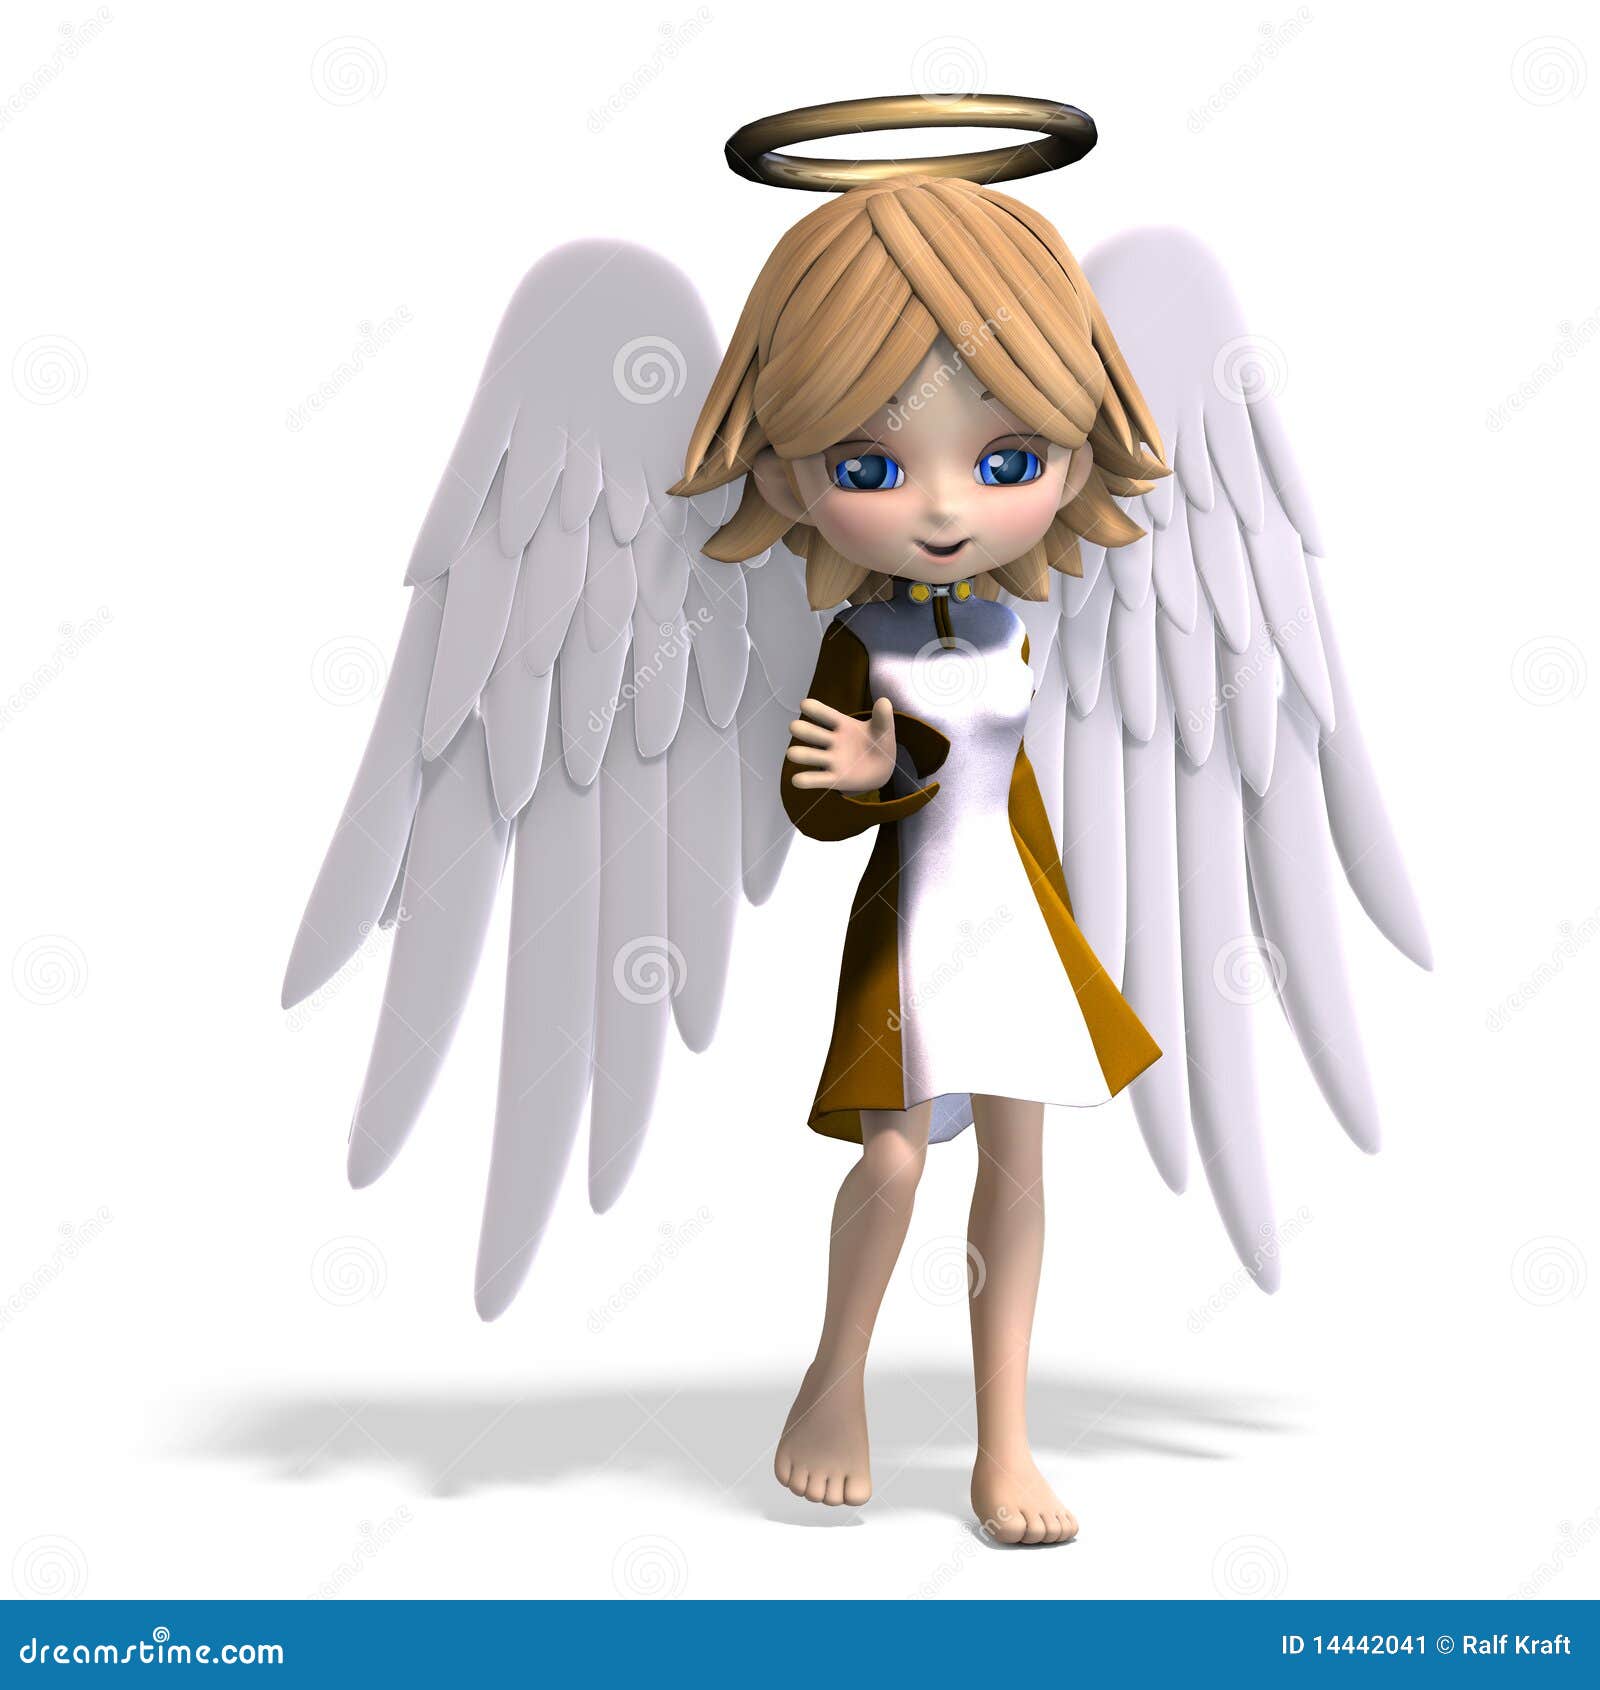 10,723 Fitness Angel Images, Stock Photos, 3D objects, & Vectors